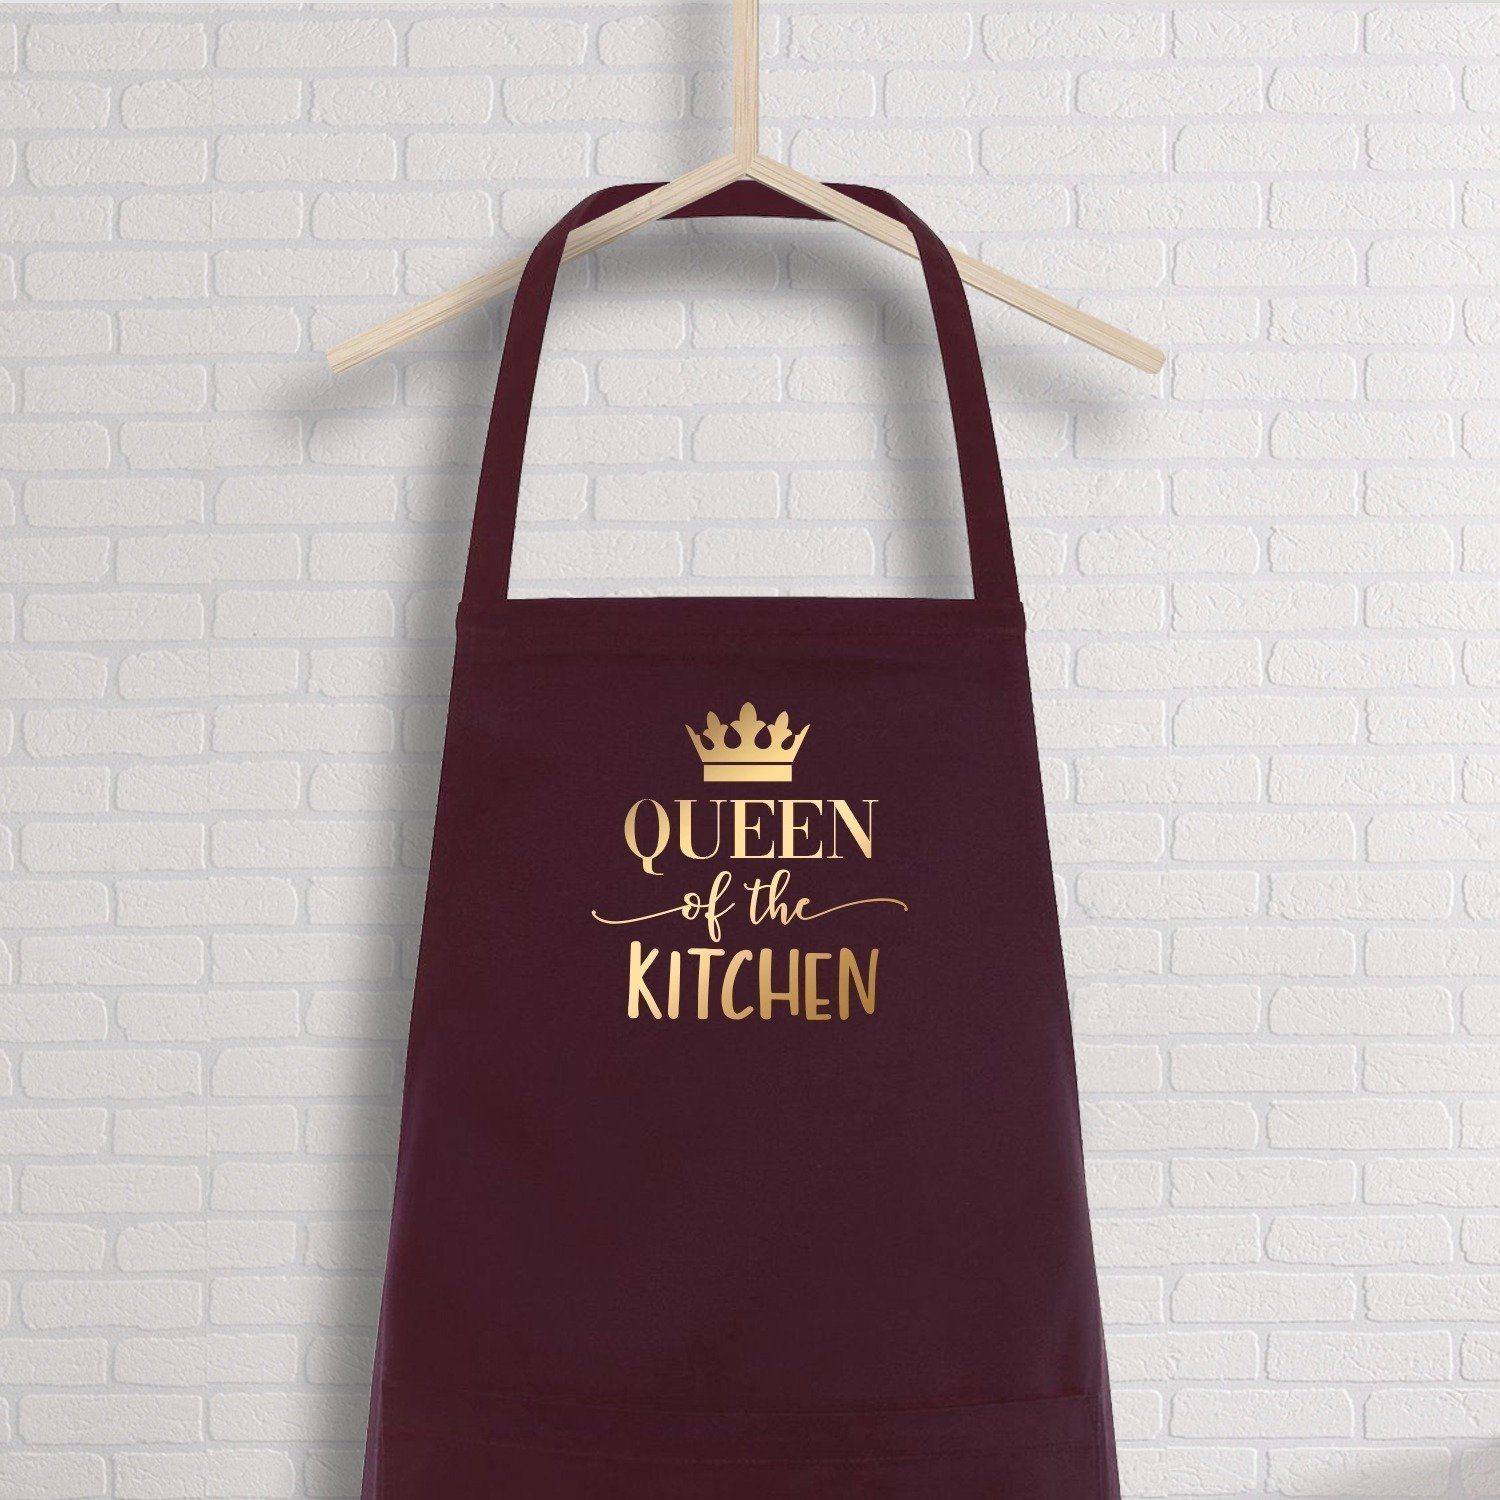 Queen Of The Kitchen Apron, Cute Kitchen Apron, Housewarming Gift, Bakers Gift